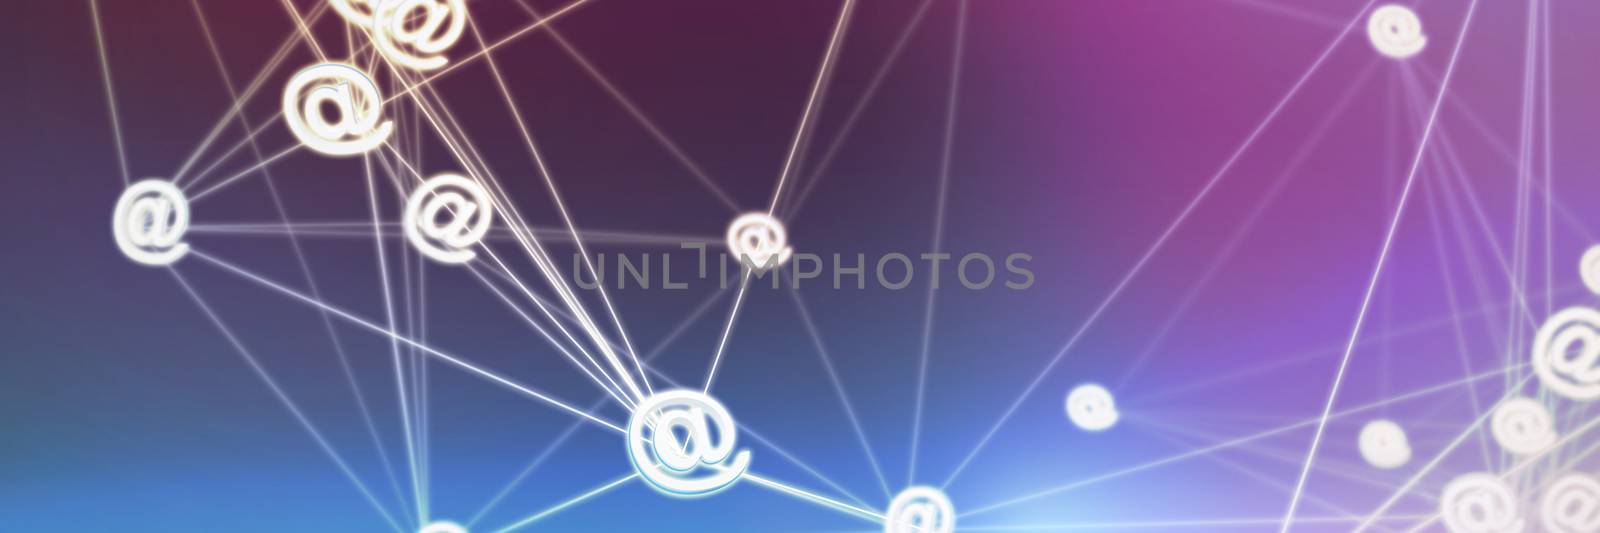 Abstract image of at email sign against turquoise and purple background